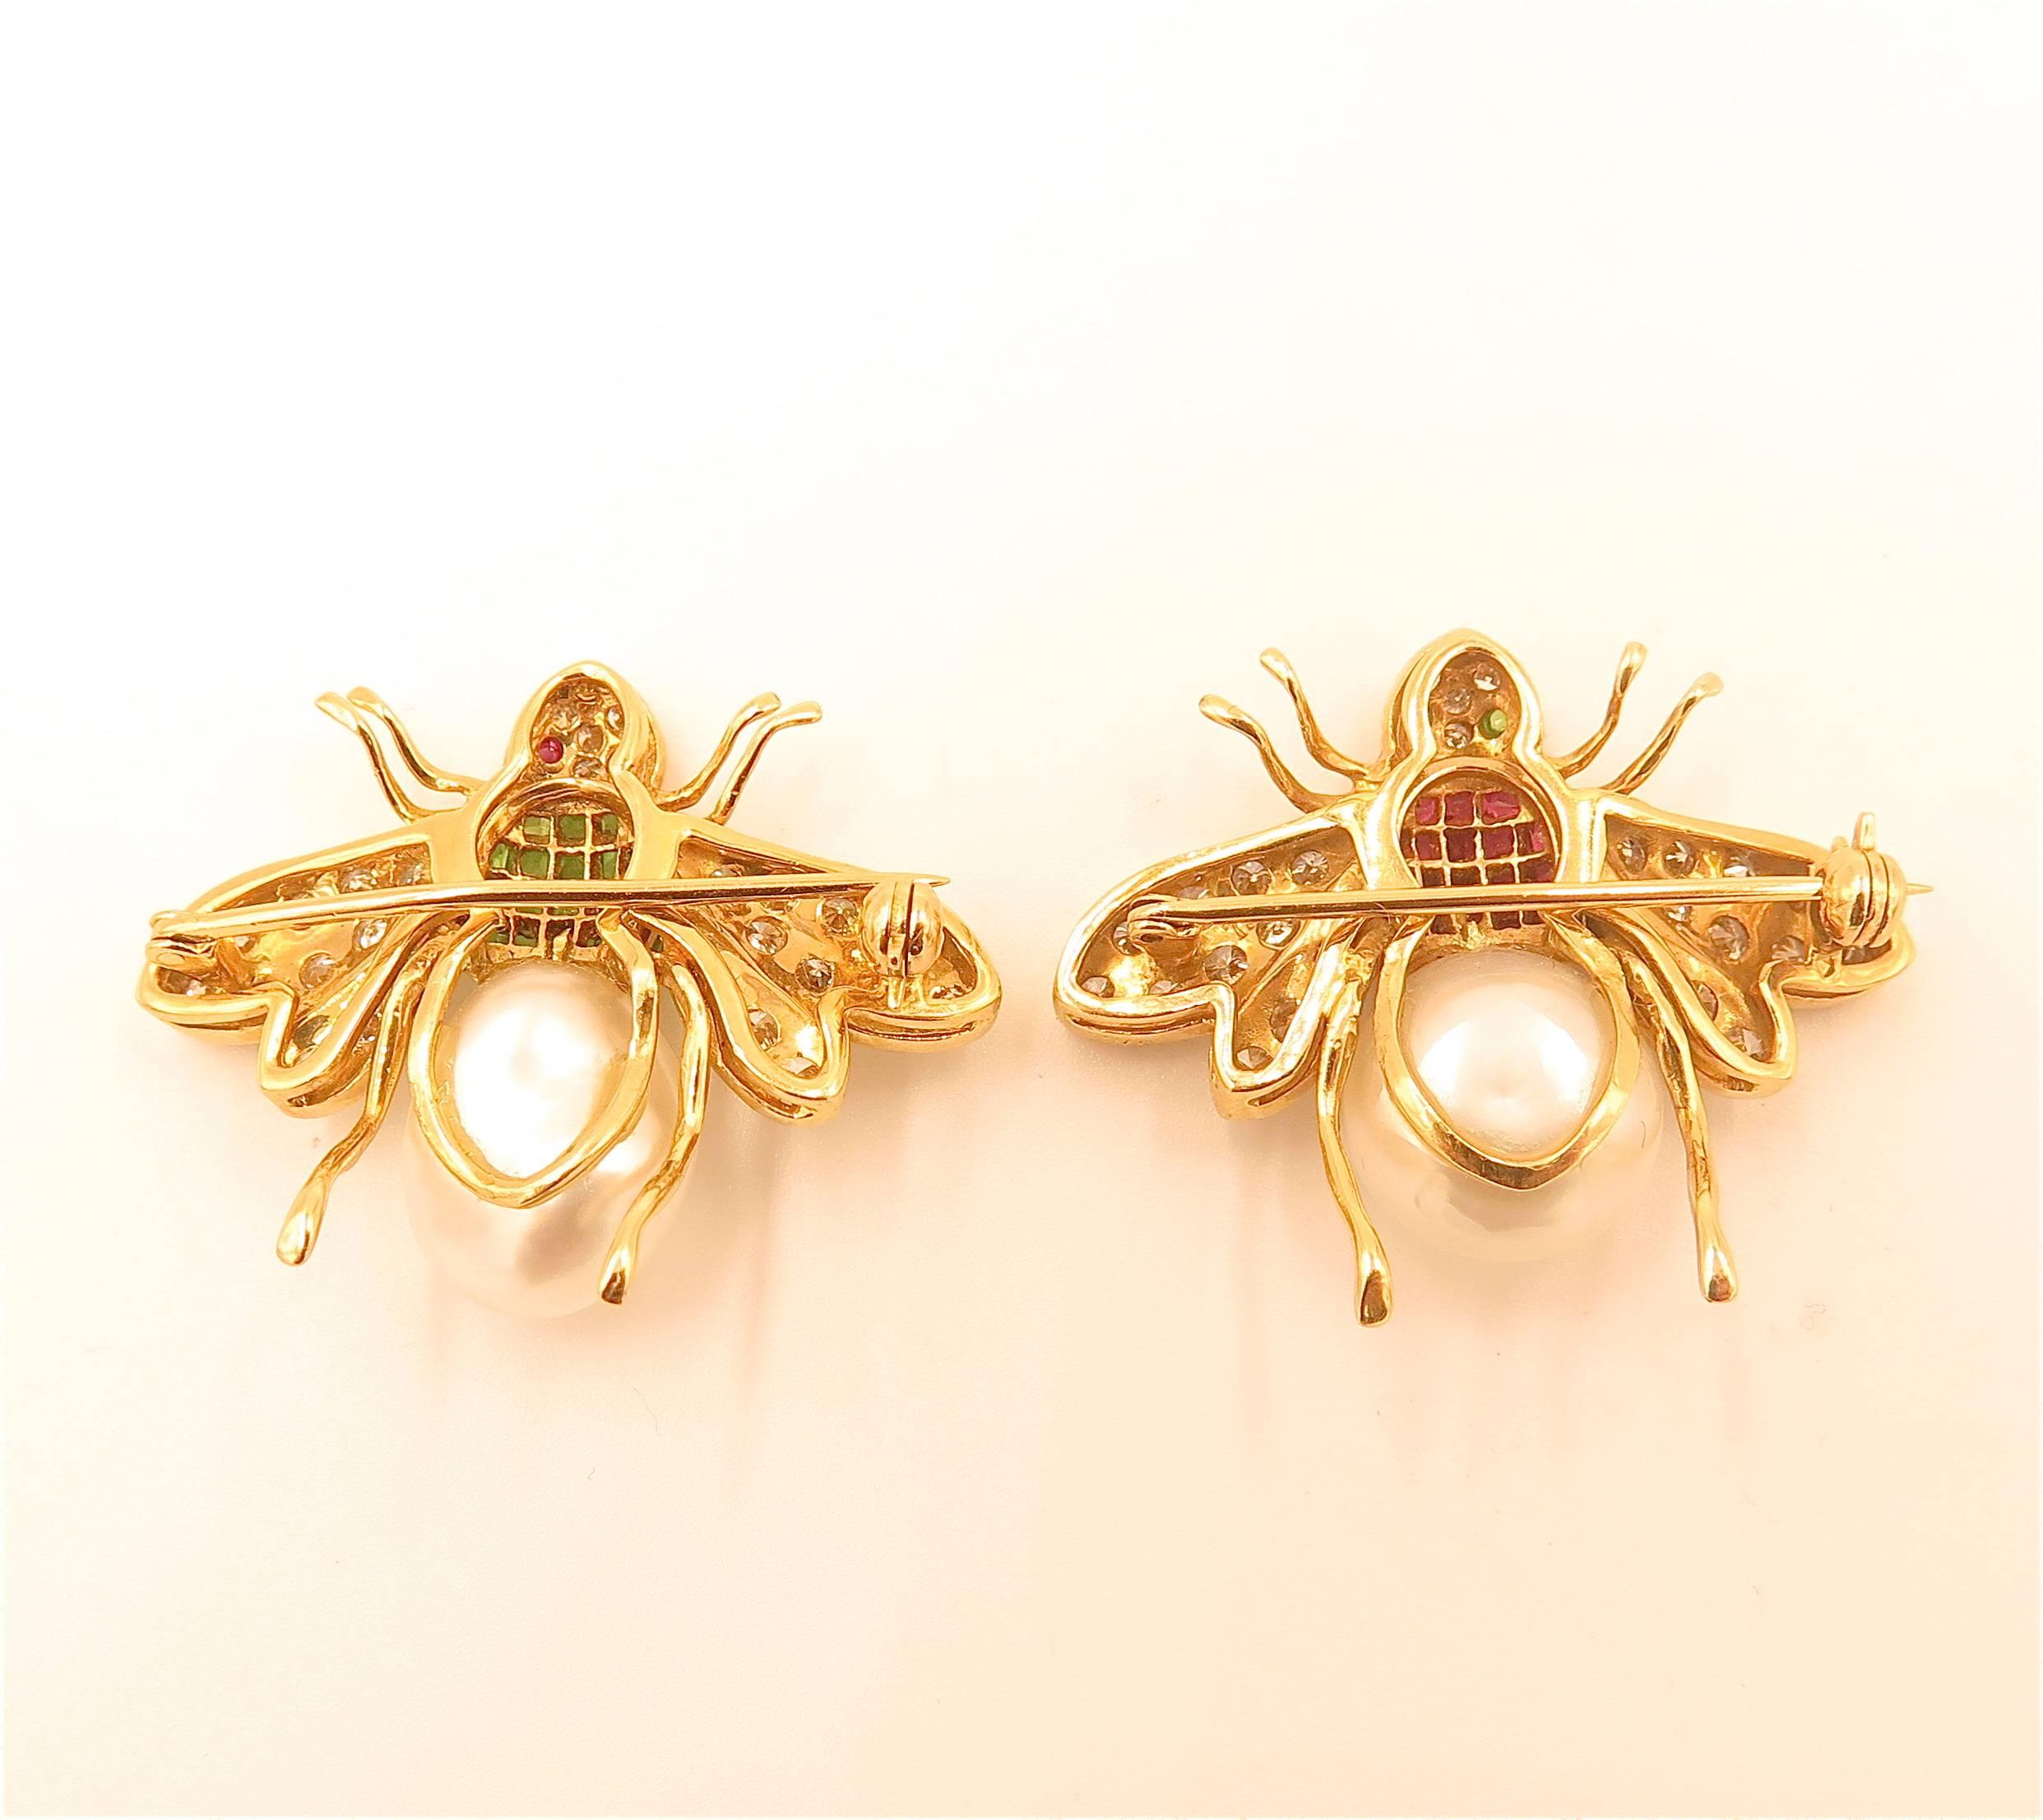 A pair of emerald, ruby, diamond, and pearl bee brooches. 18k. 26 diamonds on each bee (22 on wings and 4 on head). 1 bee has cabochon ruby eyes and 18 emeralds. 1 bee has cabochon emerald eyes and 18 rubies. Pearl makes up body of bee. 